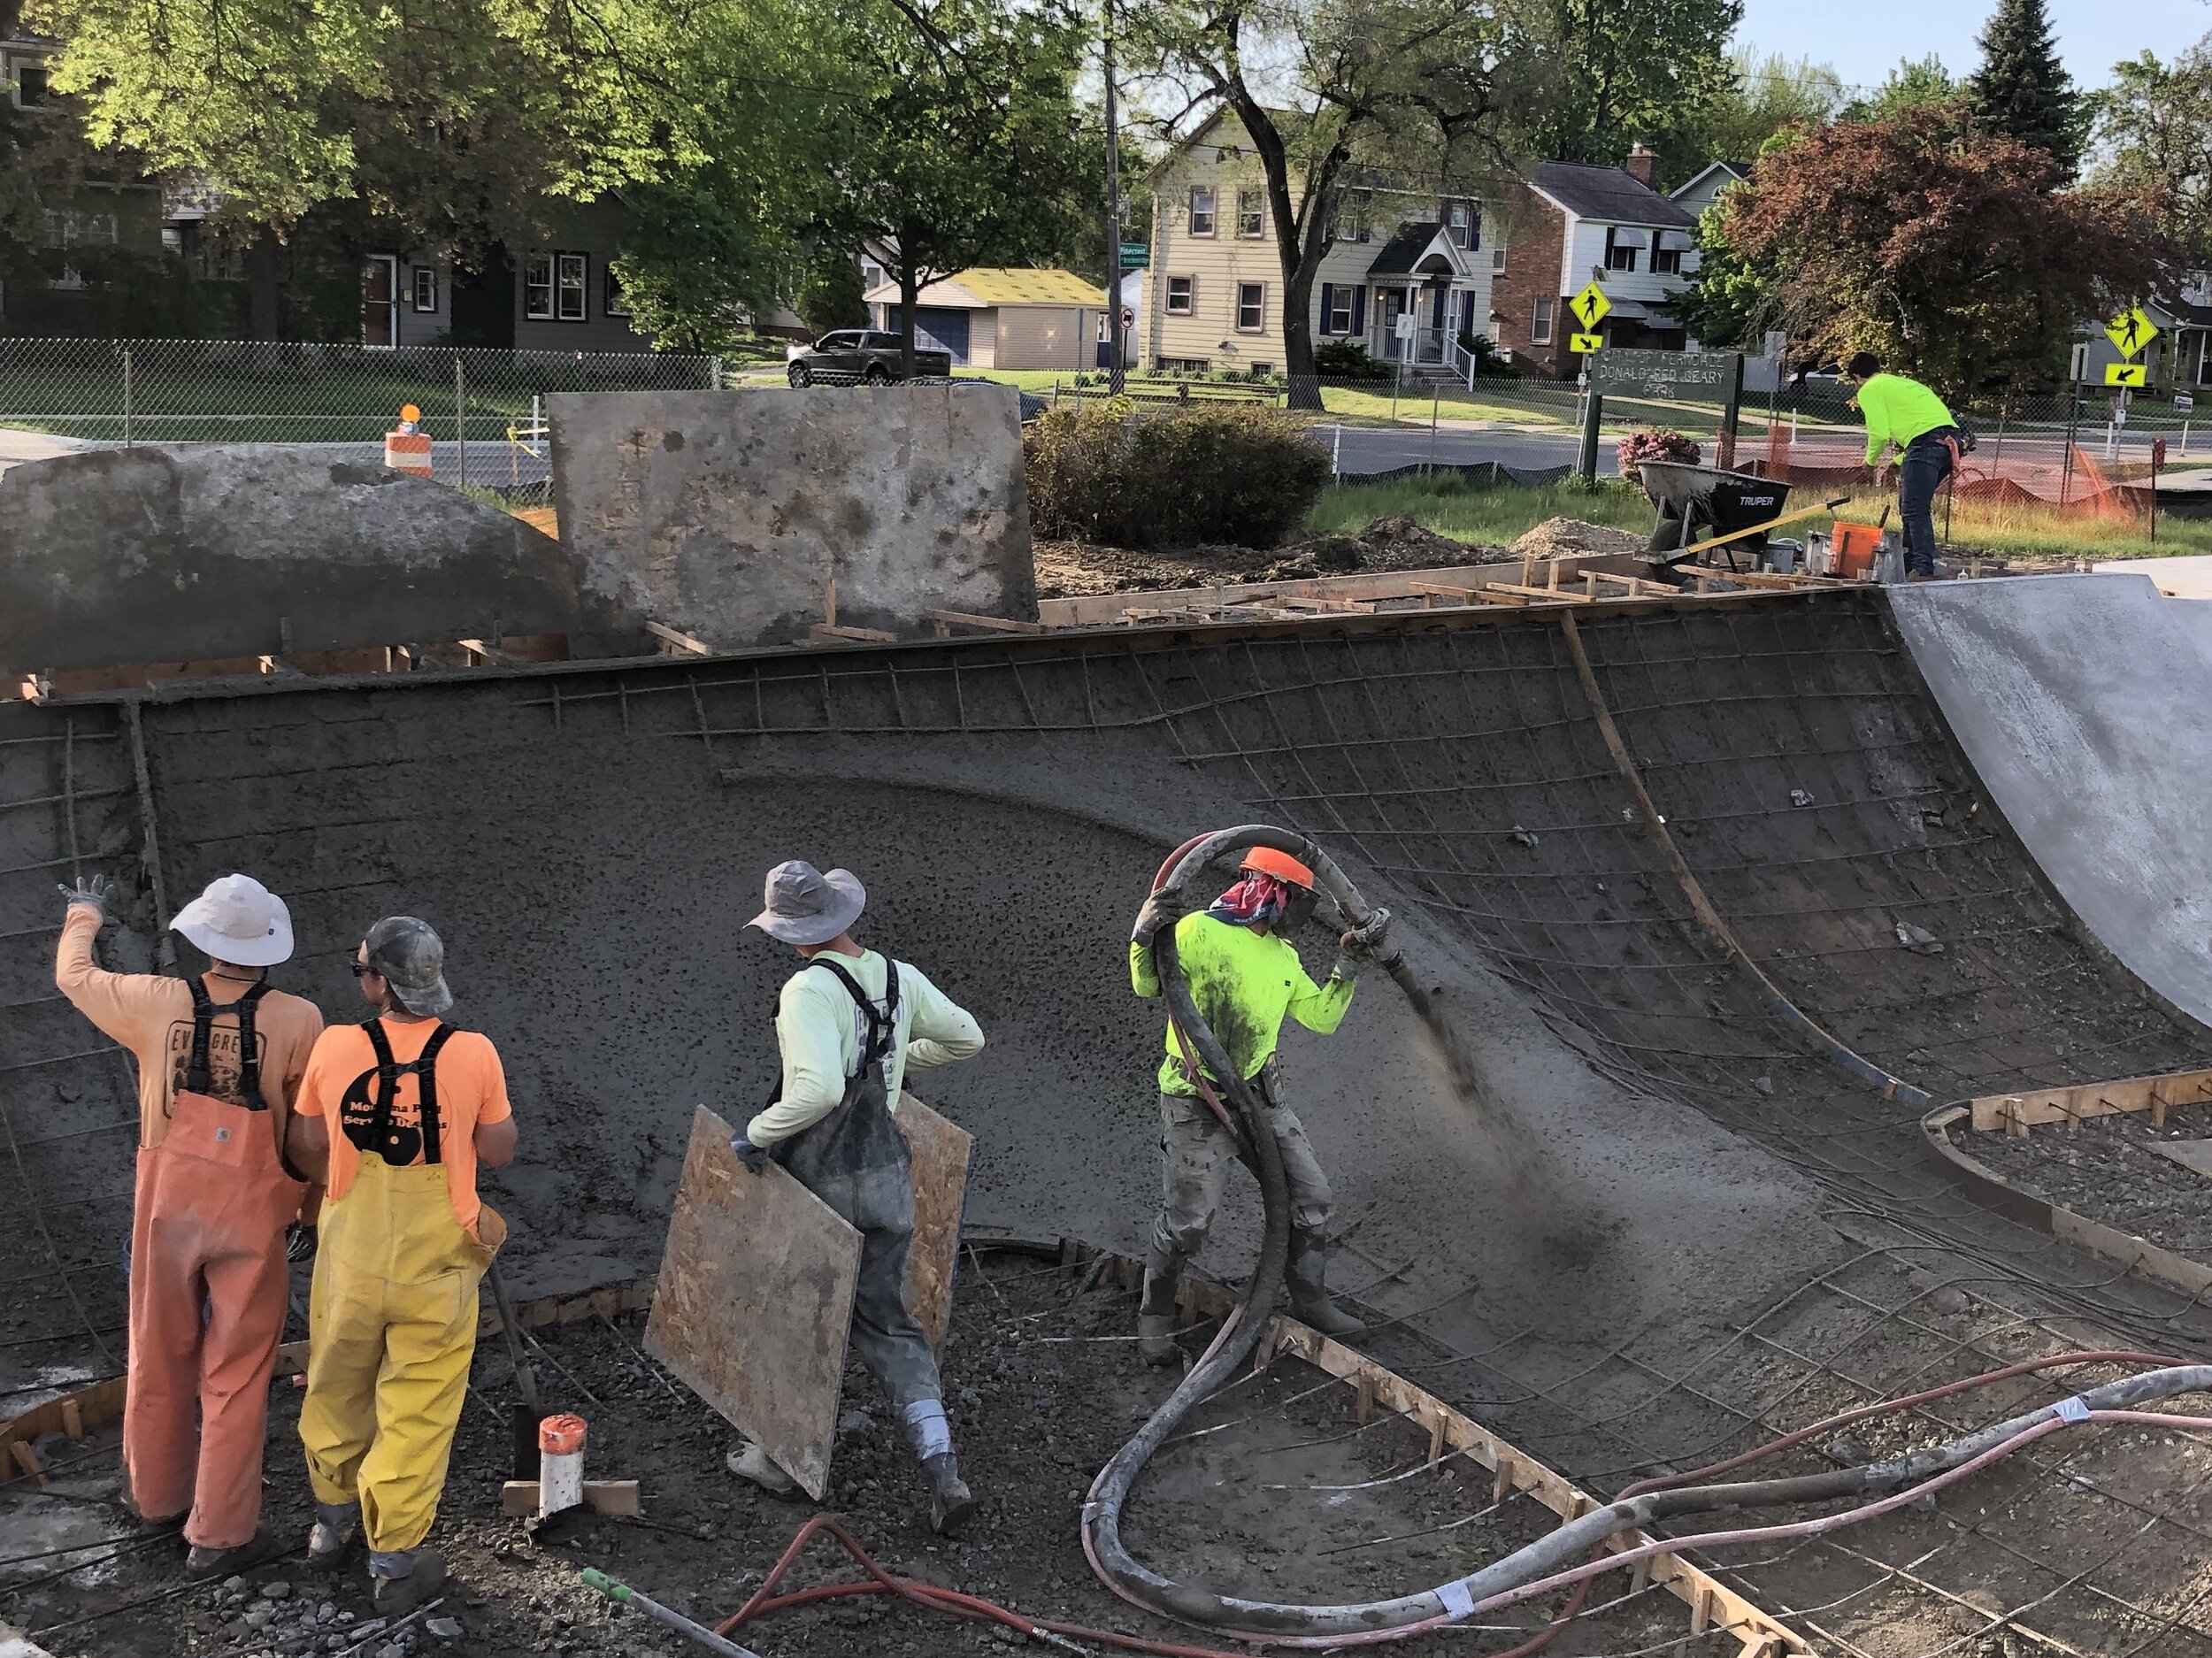 #shotcrete in Ferndale, Michigan 💪🏽 Shotcrete is sprayed concrete conveyed through a hose and pneumatically projected at a high velocity onto a surface.